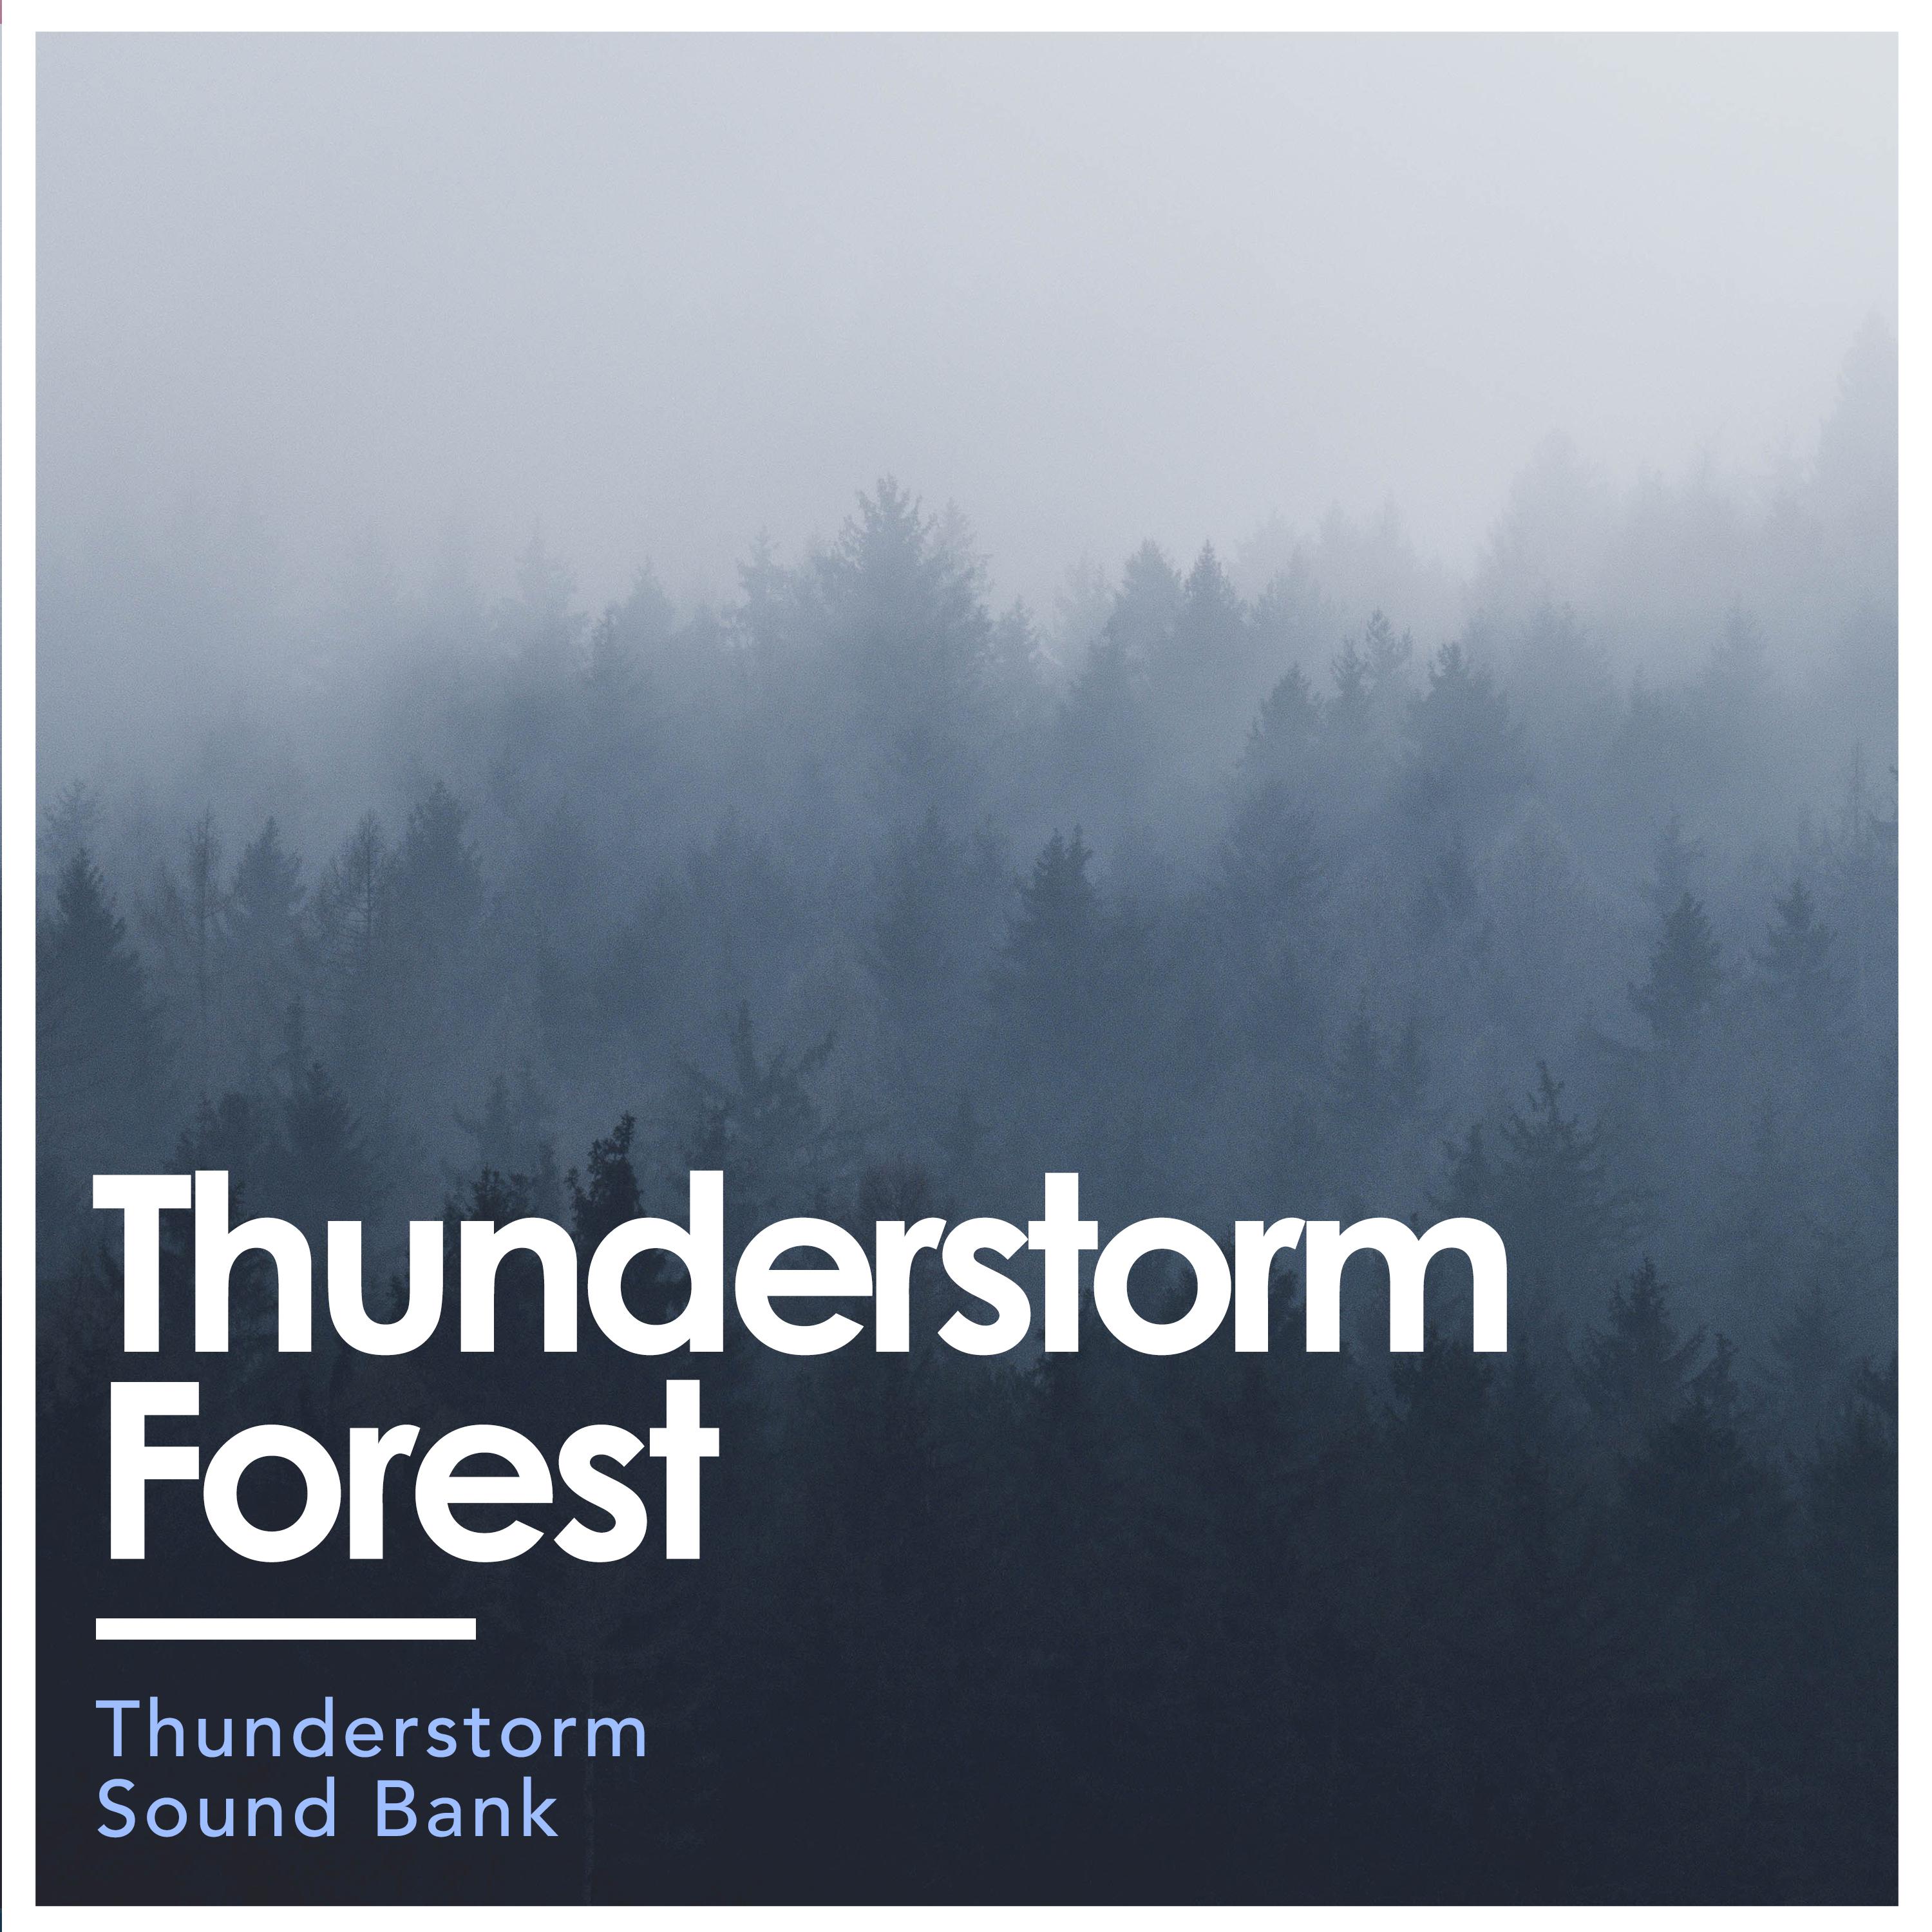 Thunderstorm Forest